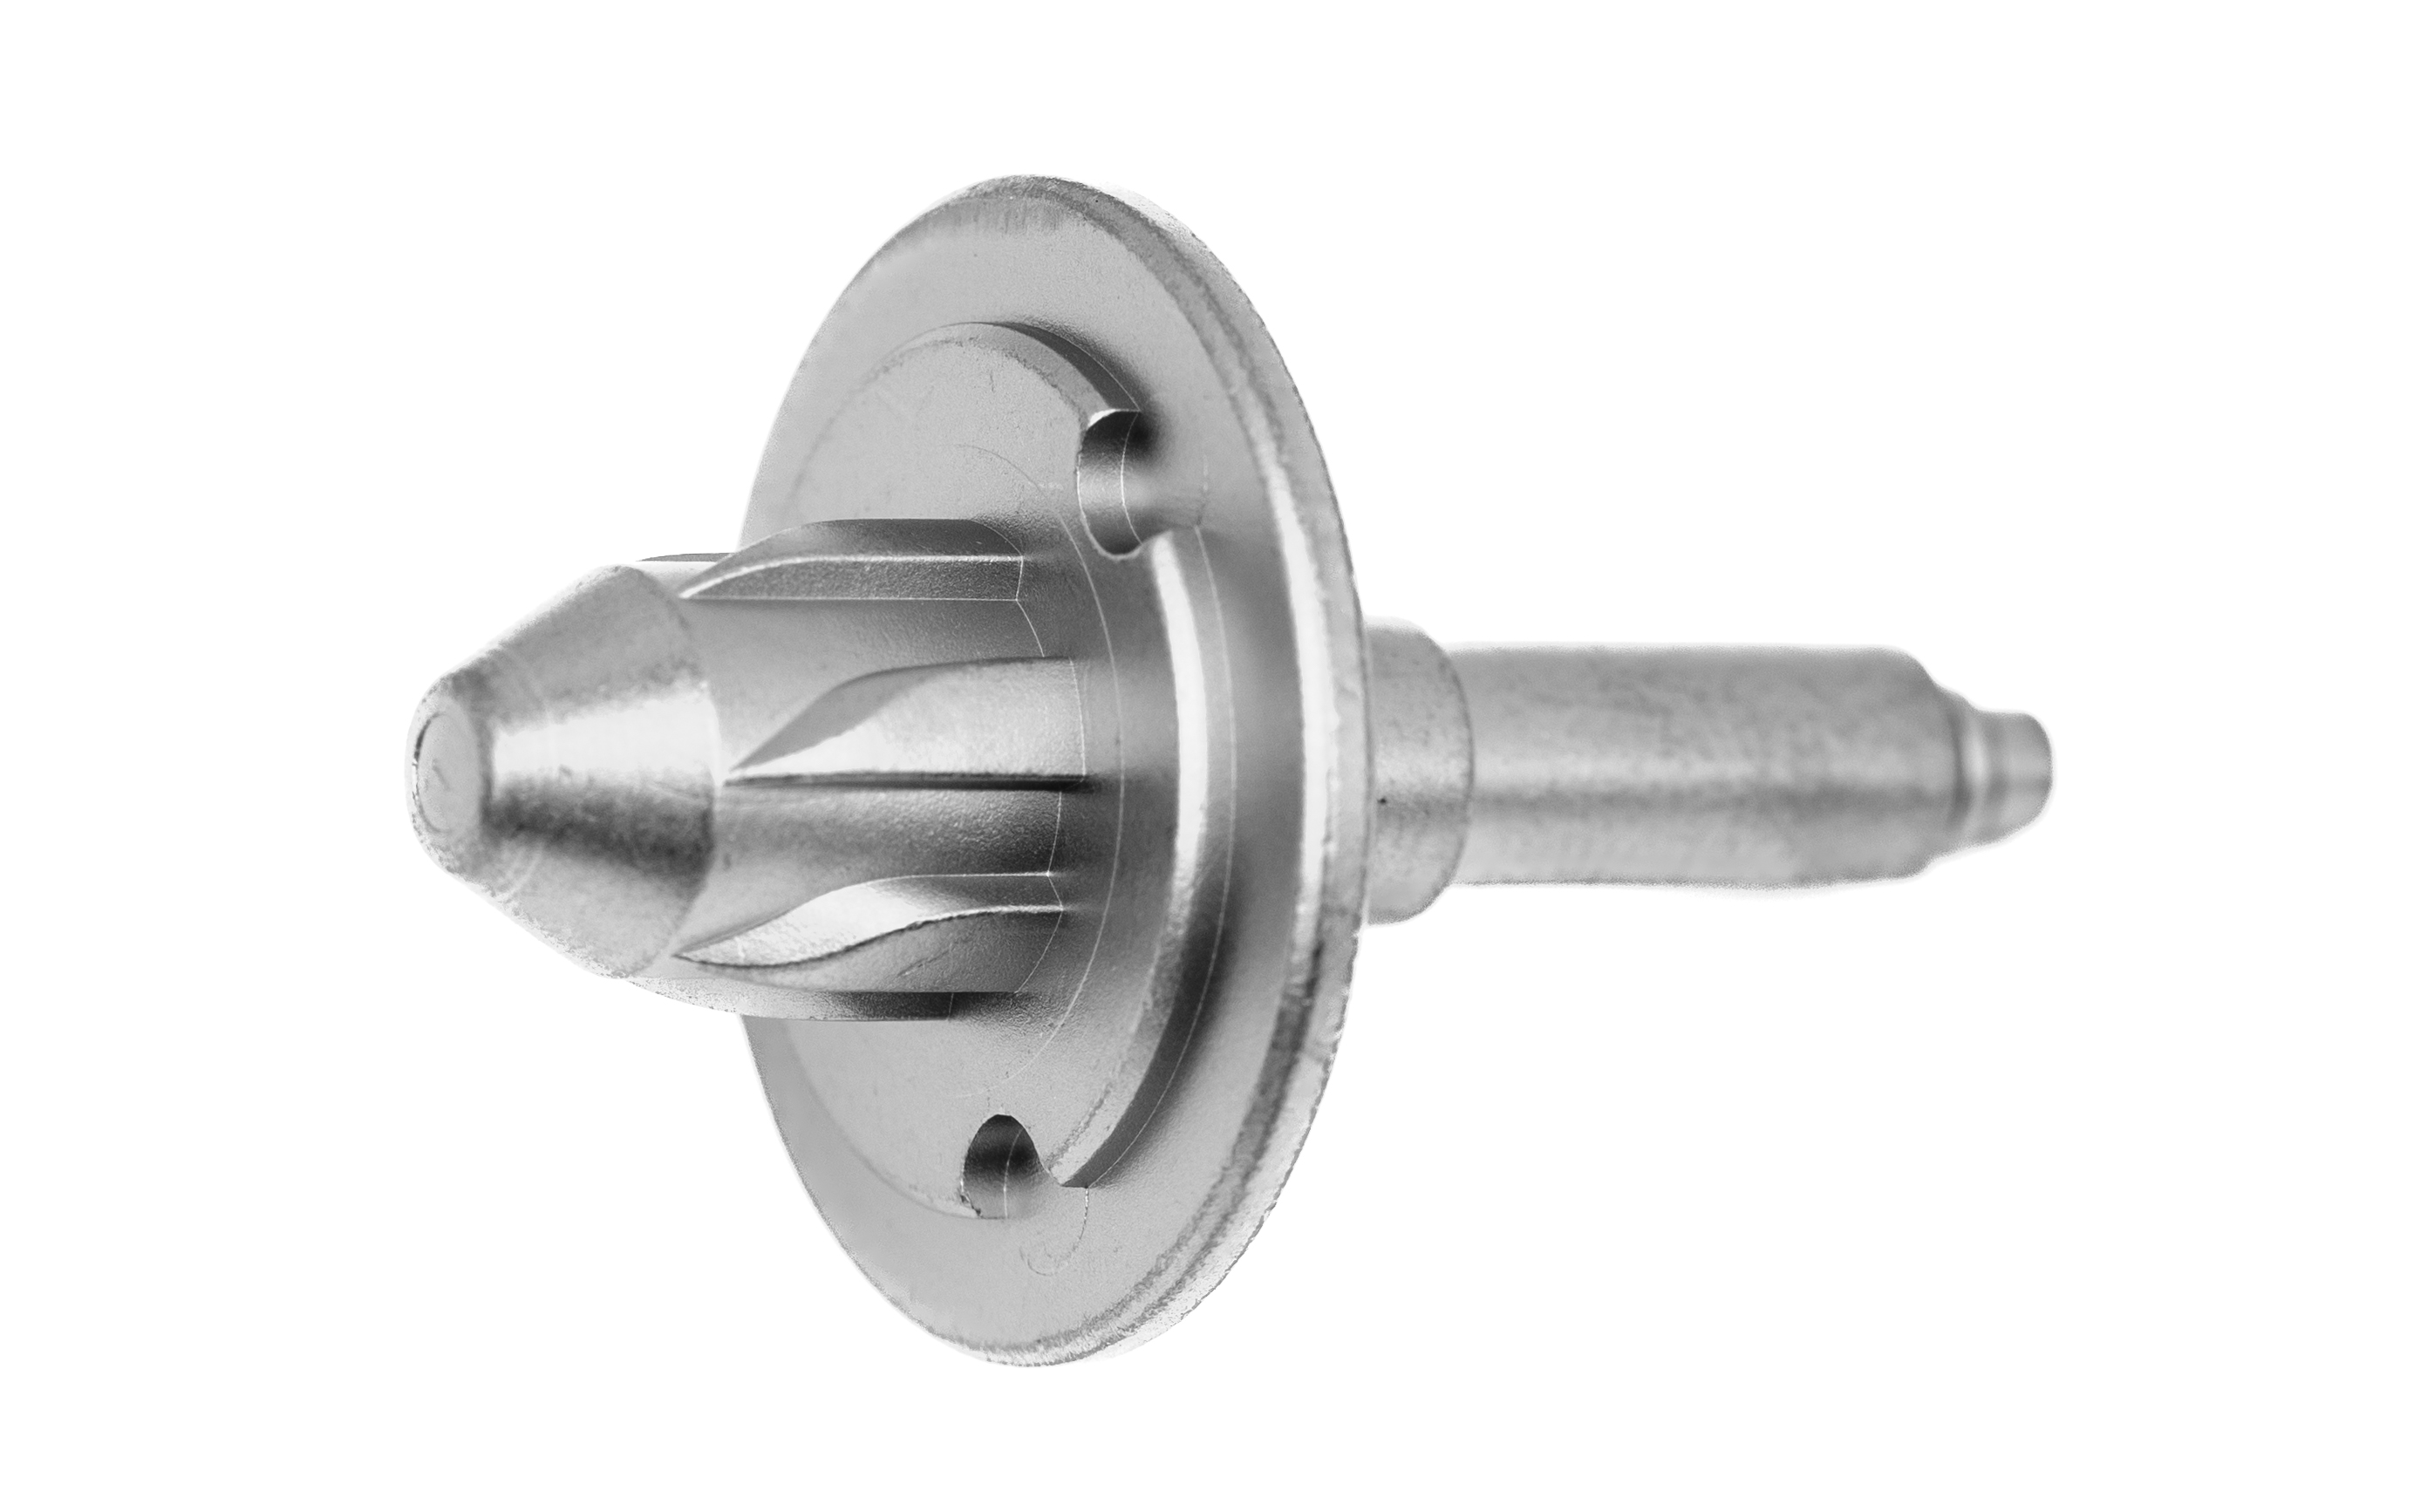 Output Shaft Components for Automation Equipment